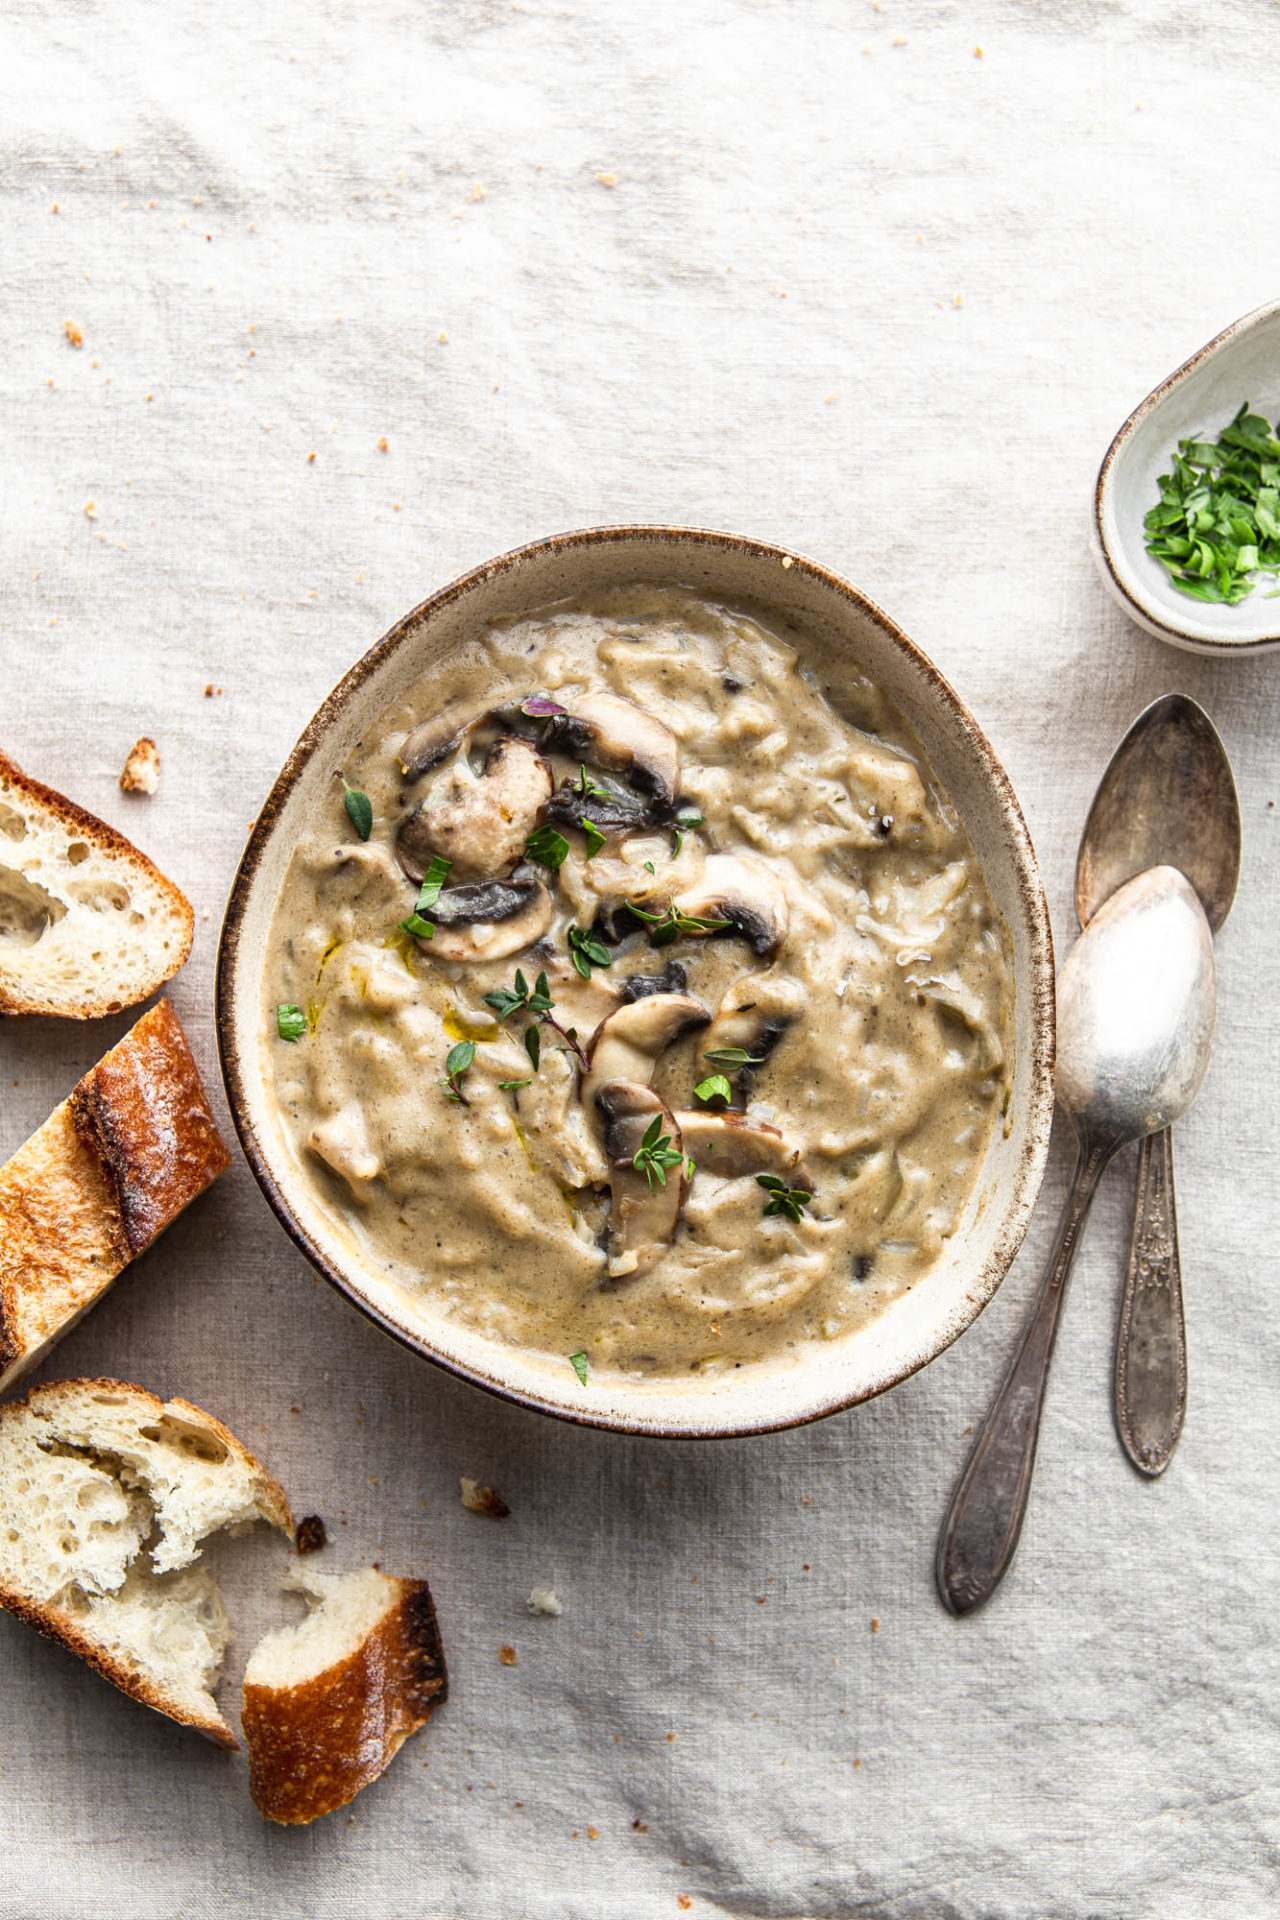 Cream Of Mushroom Soup with sourdough french baguette photography